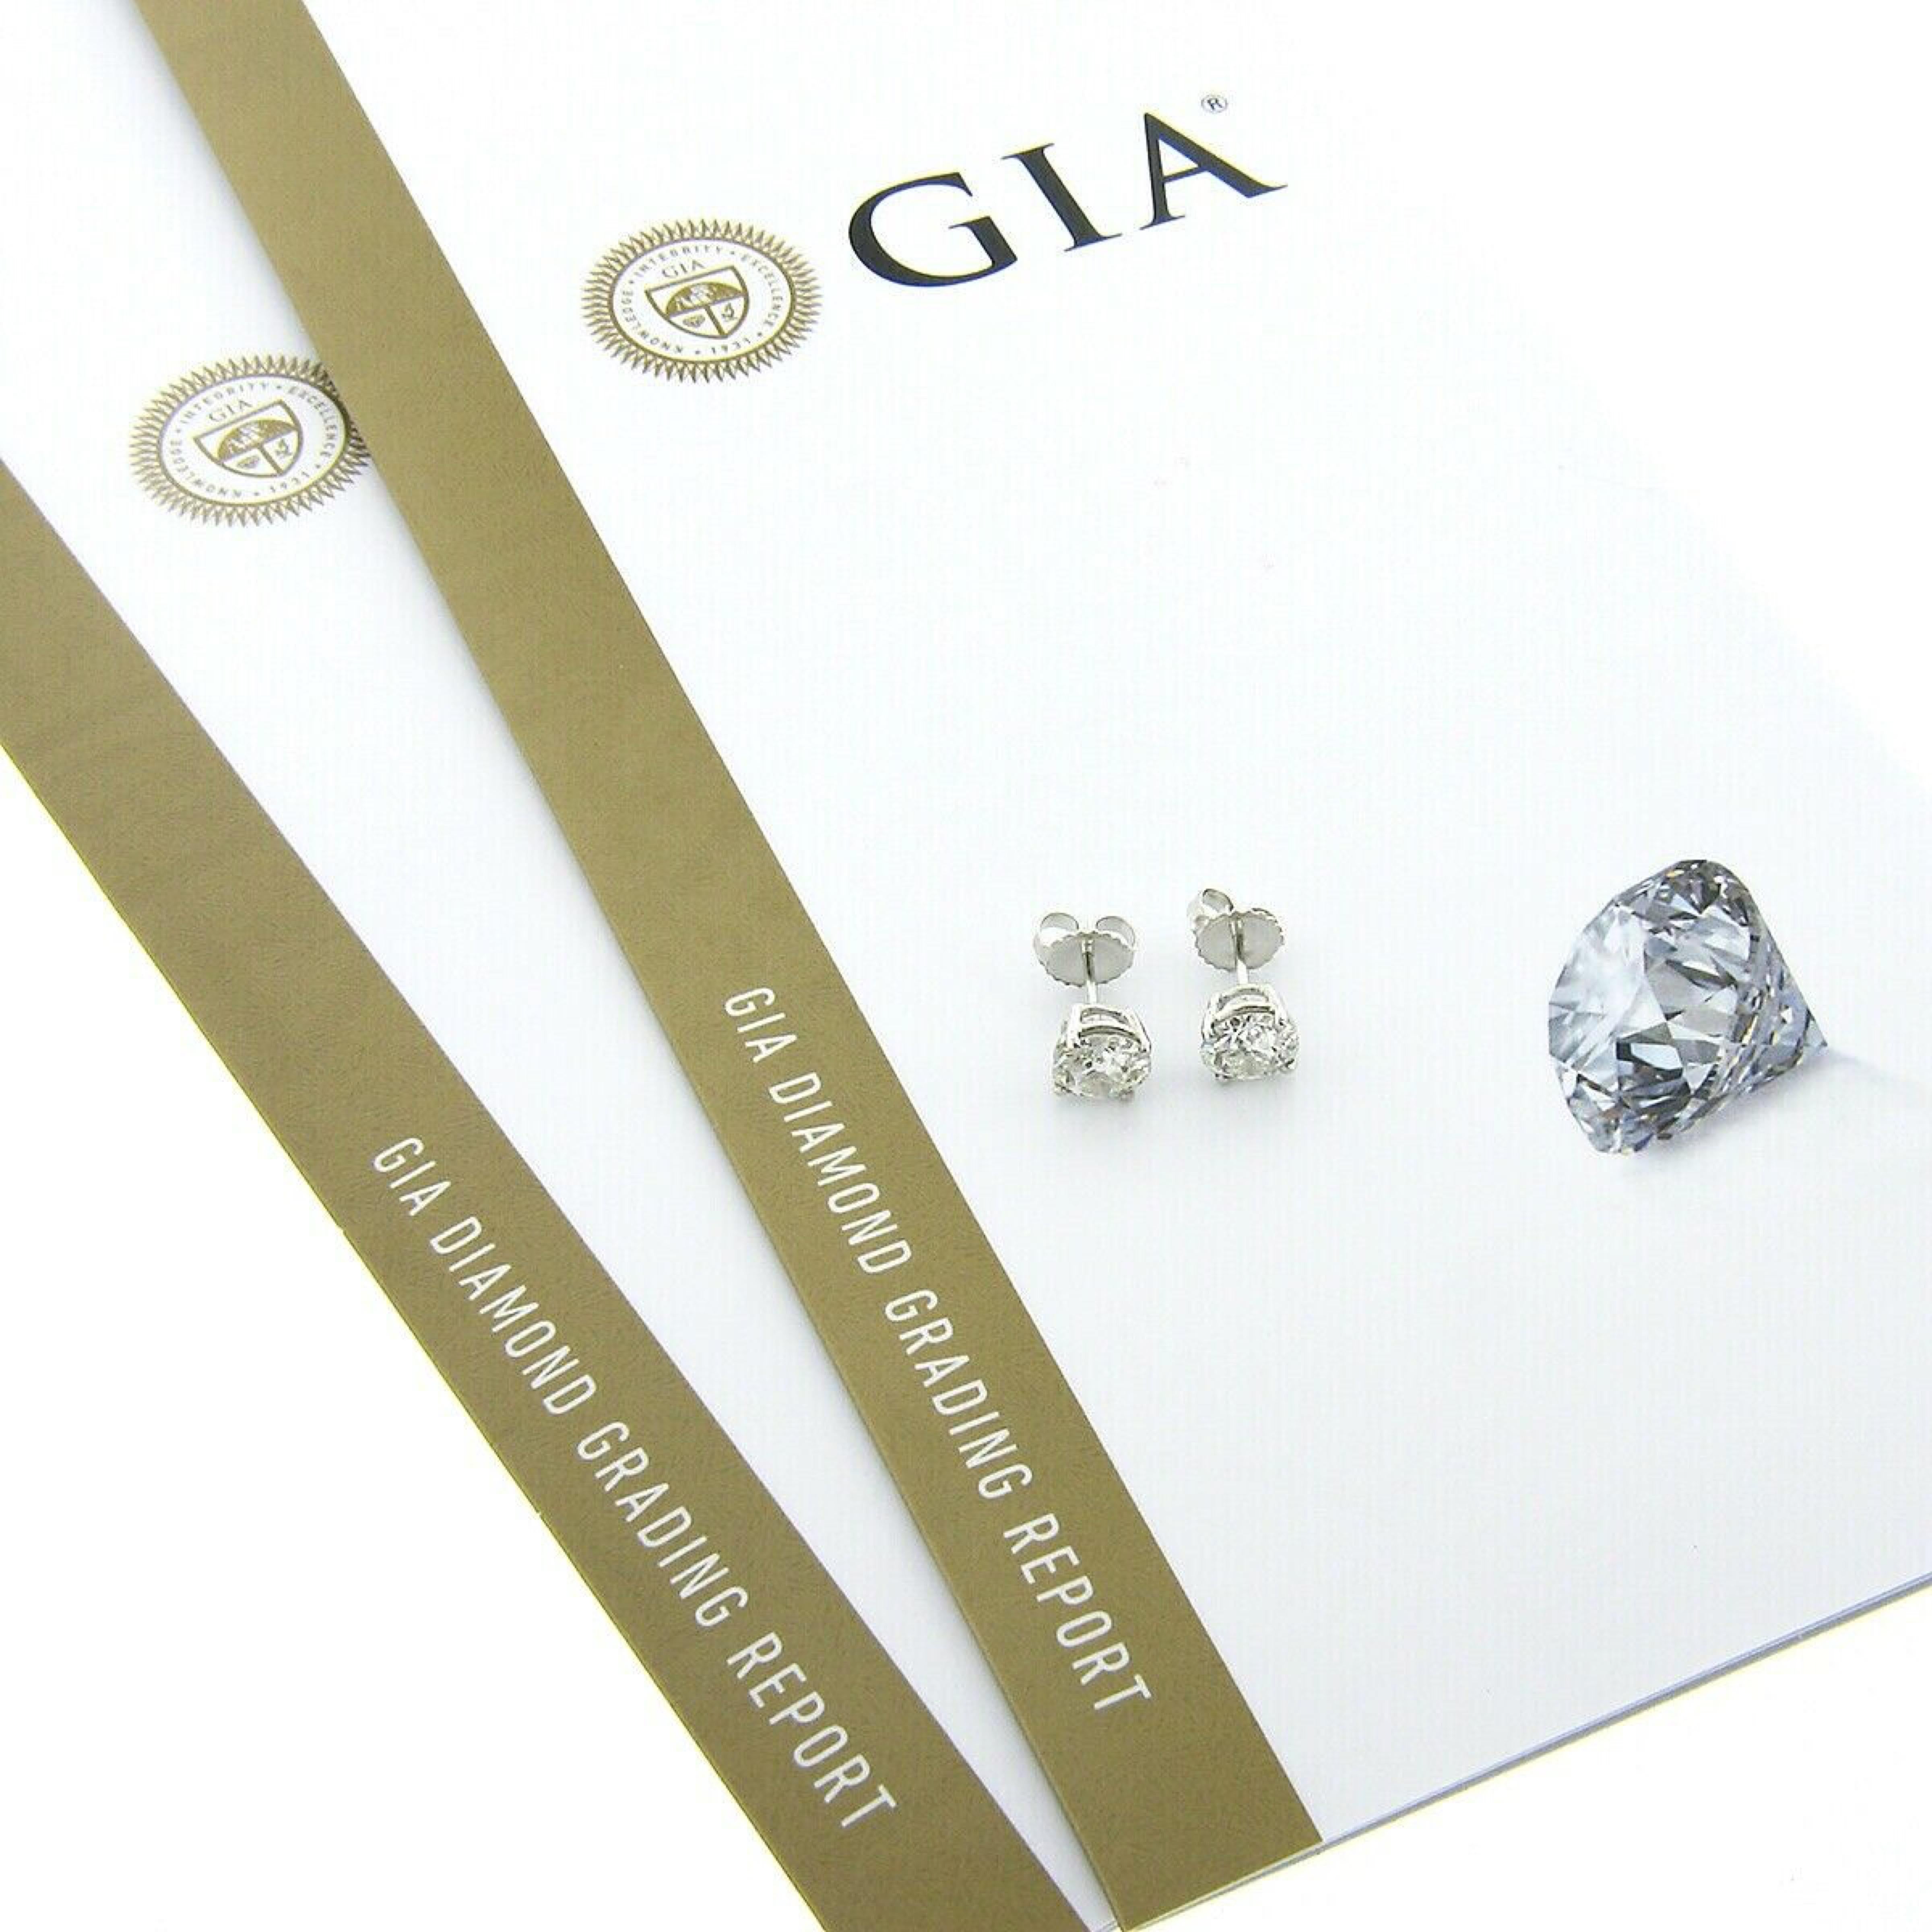 Here we have an outstanding pair of classically styled diamond stud earrings that were newly crafted from solid 950 platinum. They feature a pair of genuine, antique, old European cut diamonds that are each GIA certified and weigh a total of exactly